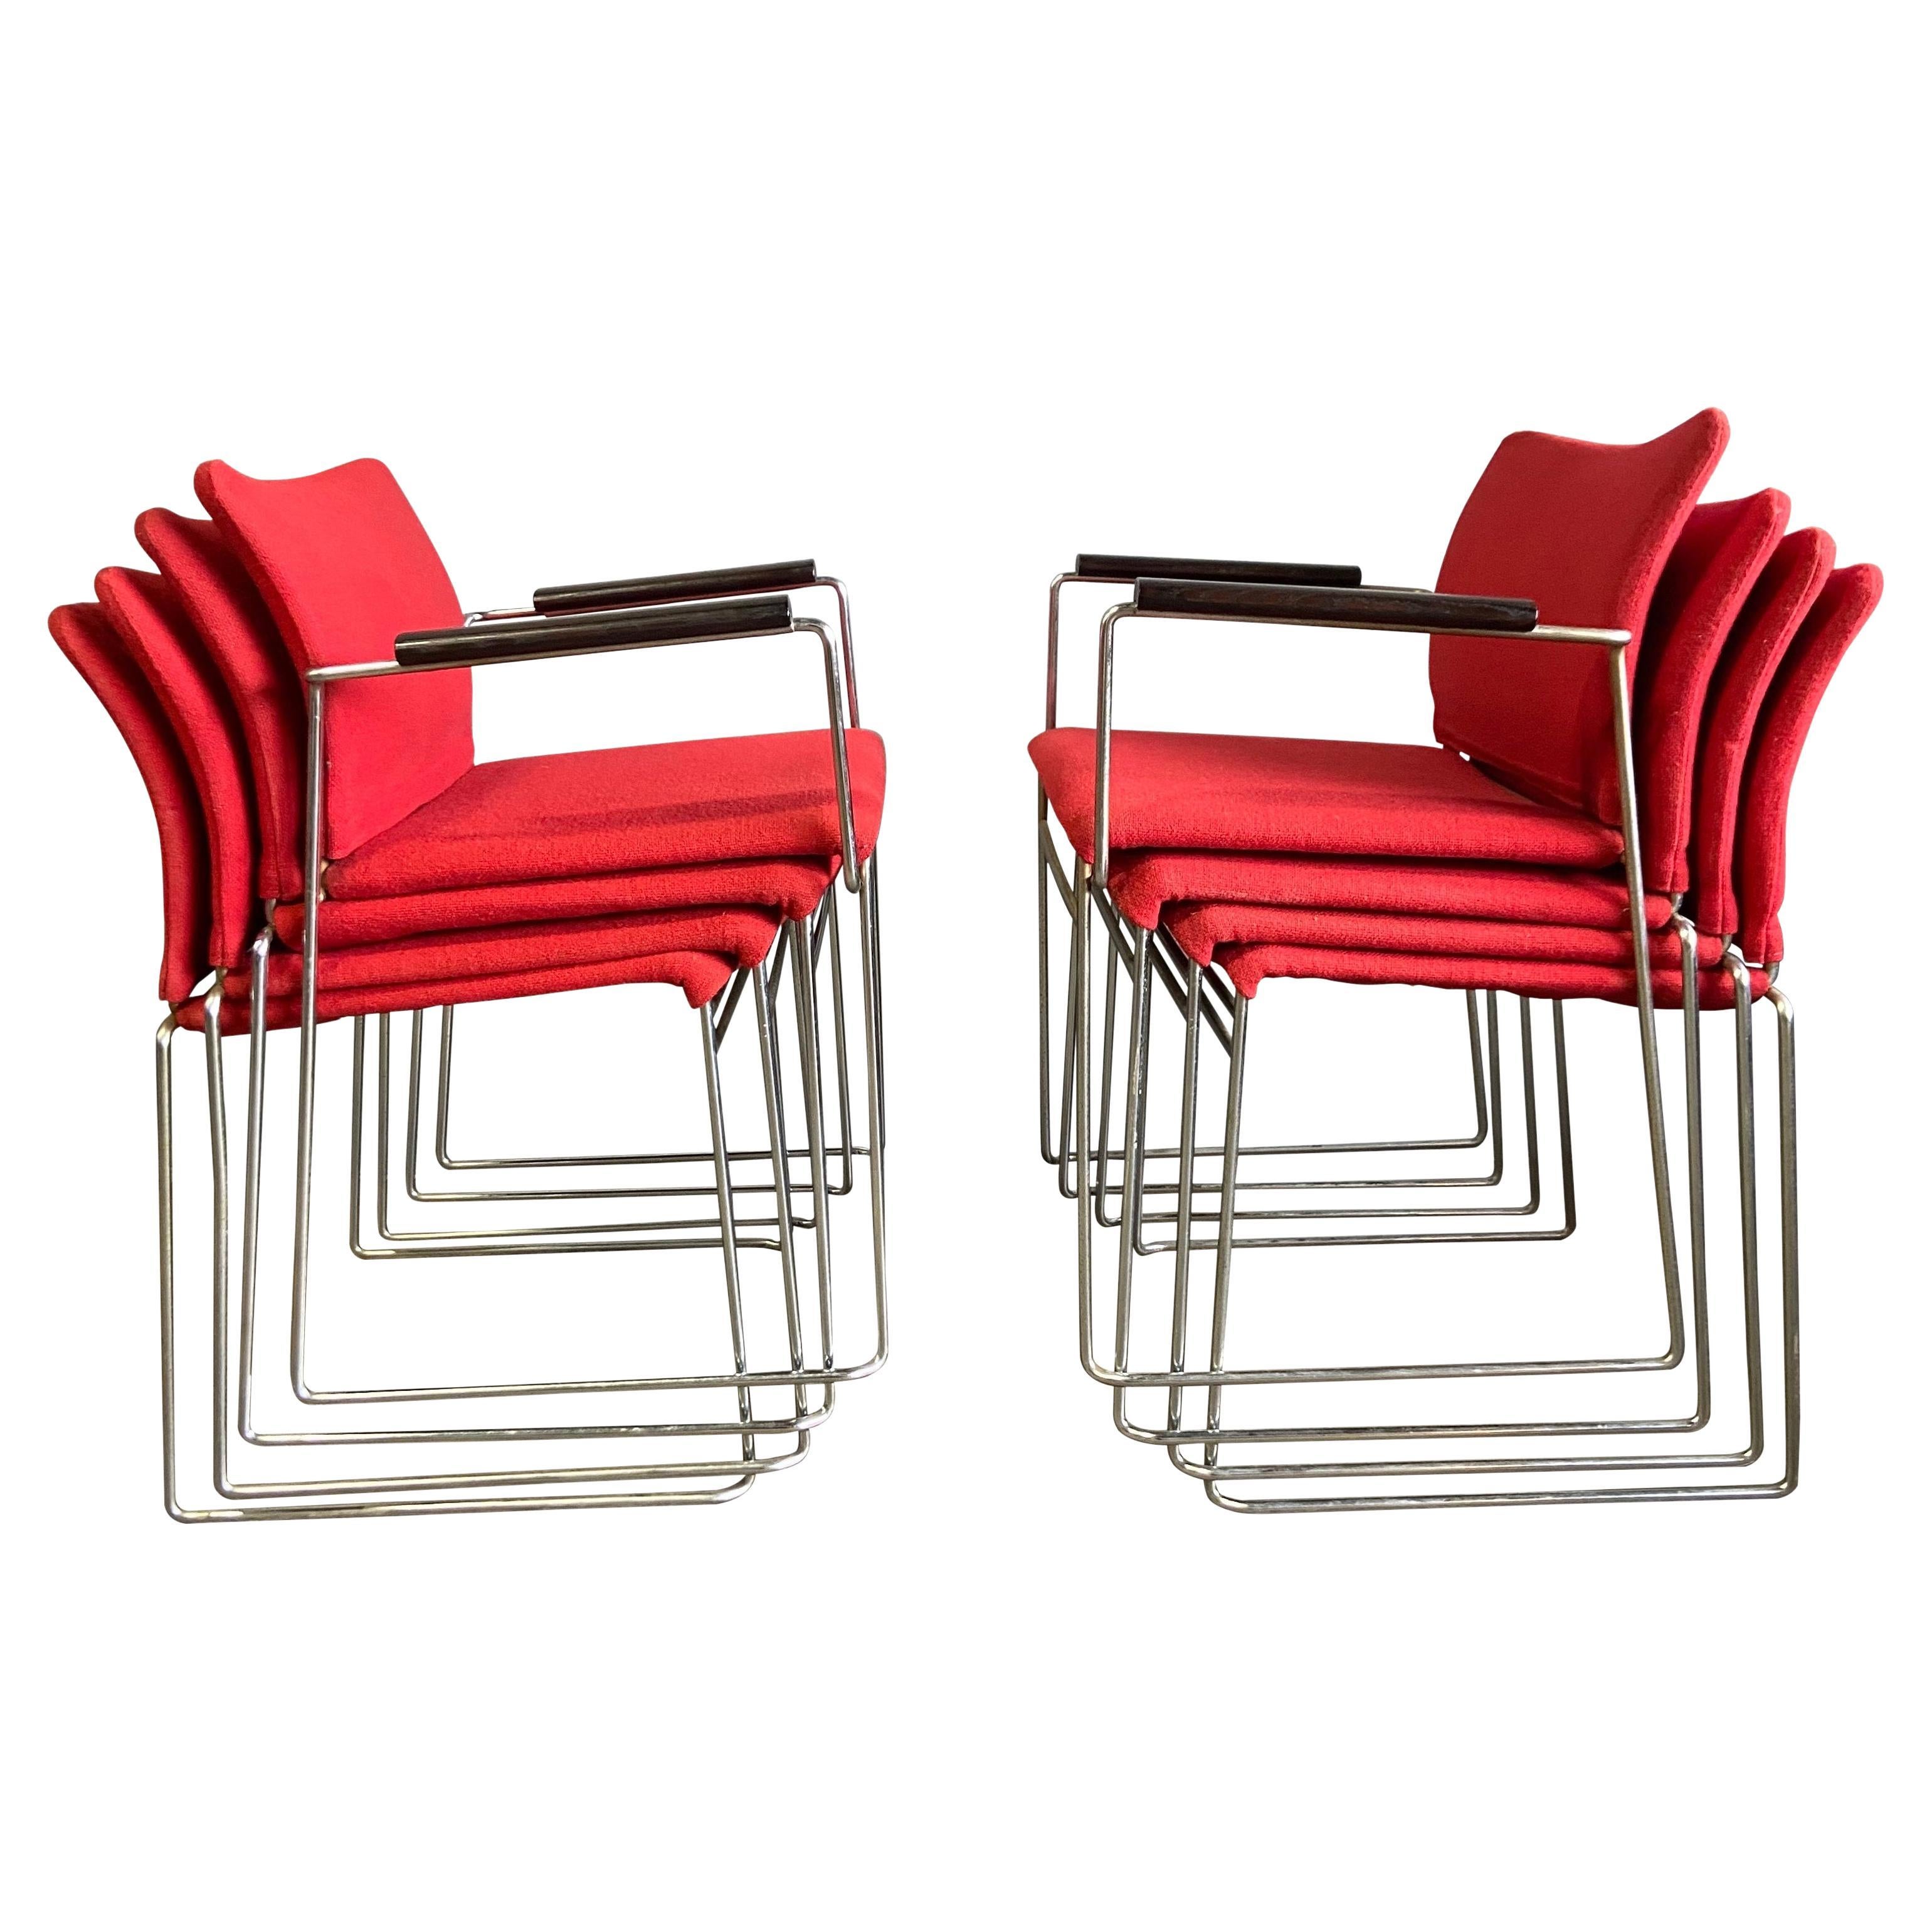 For your consideration are these wonderful Jano chairs designed by Kazuhide Takahama. Featuring original upholstery on chrome steel frame. These are original and produced by Simon Gavina and now Cassina. Fits perfectly in any midcentury or